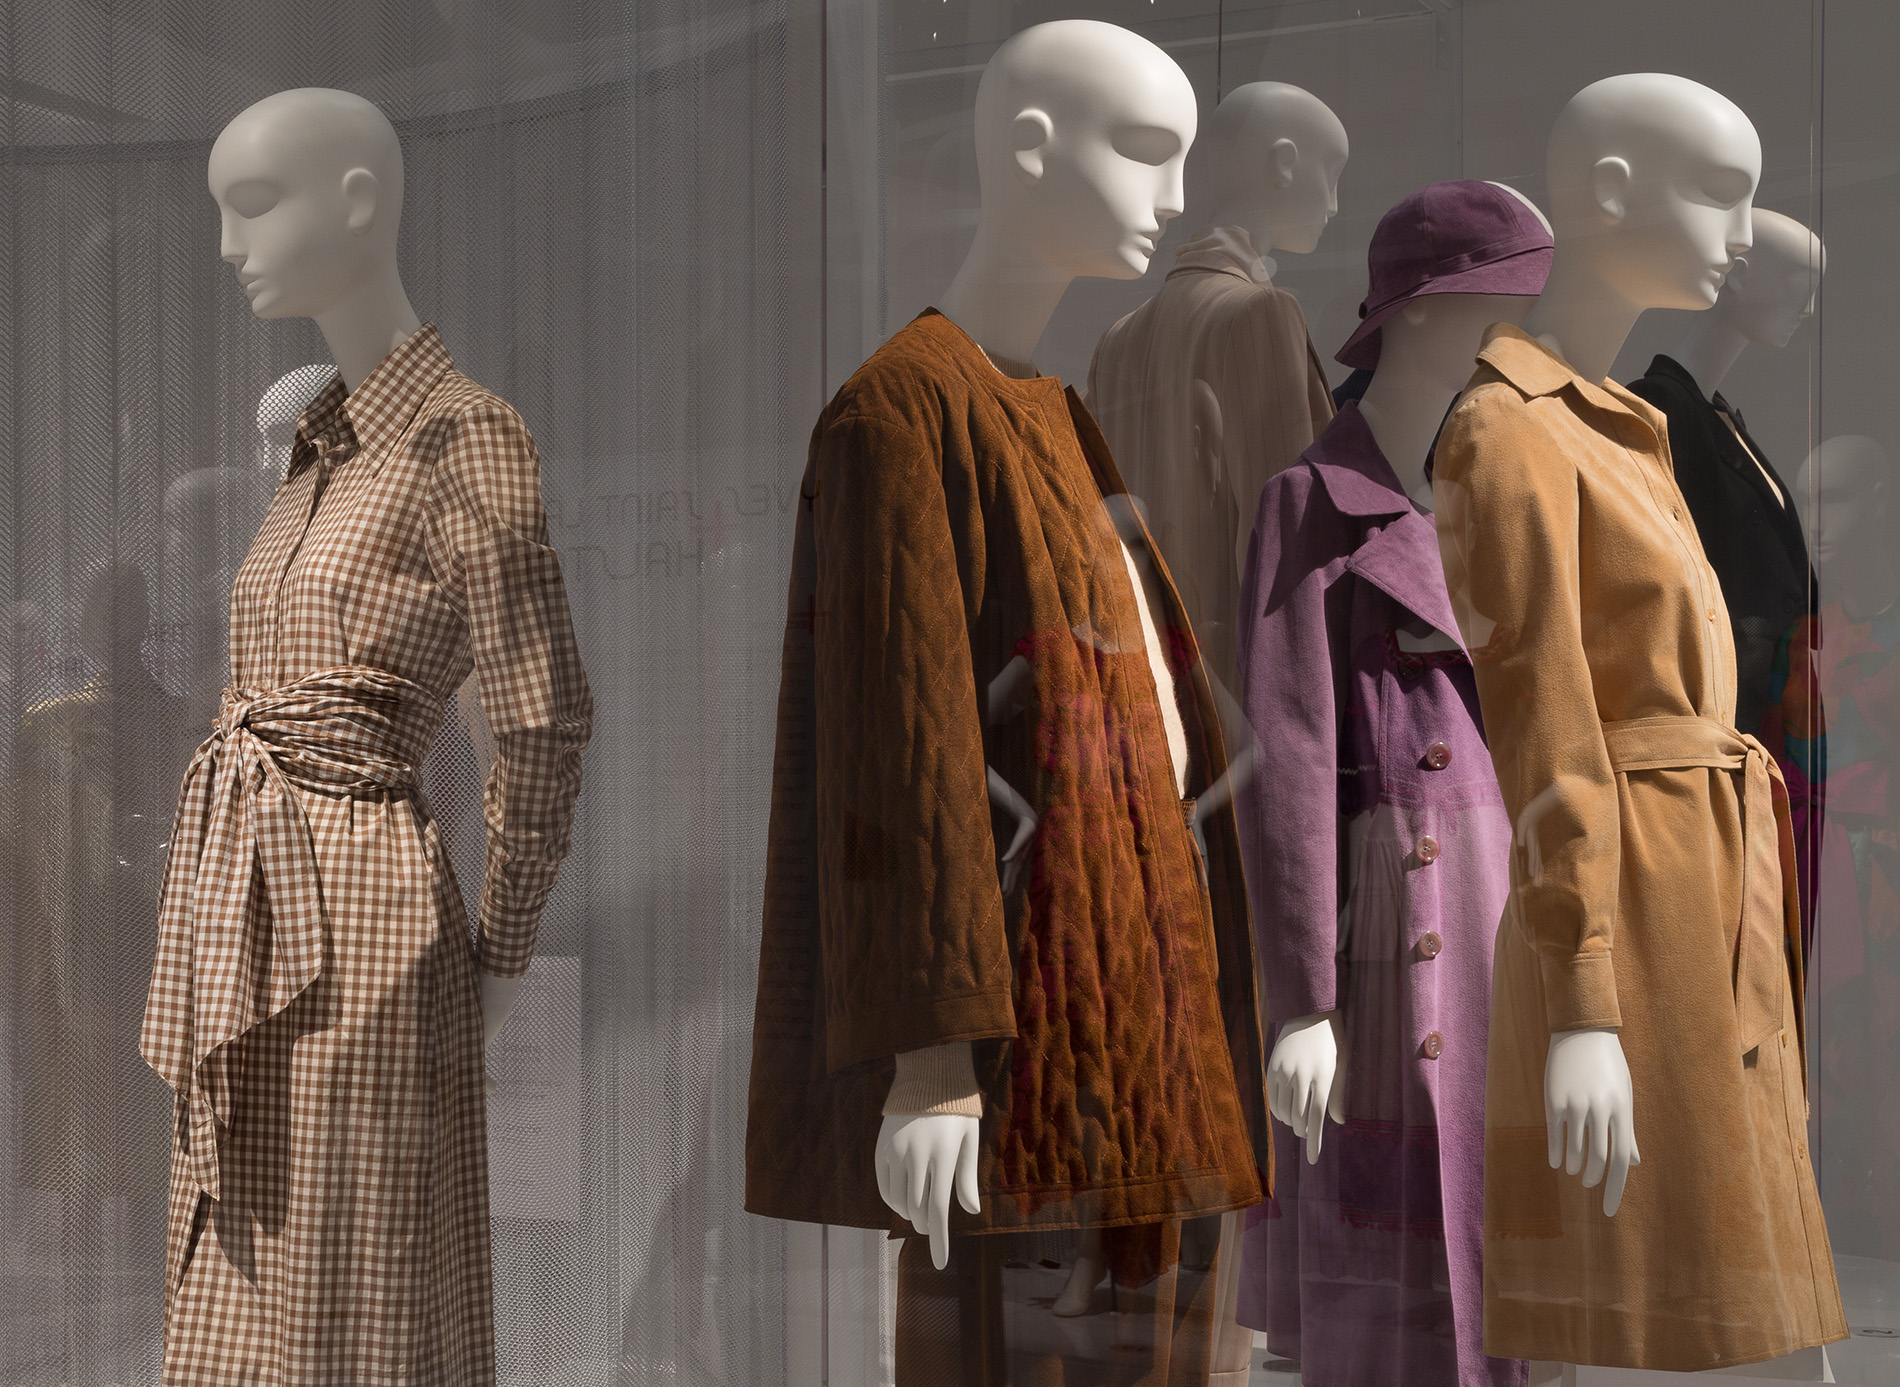 exhibition installation with several coats and ensembles on many mannequins facing away from each other